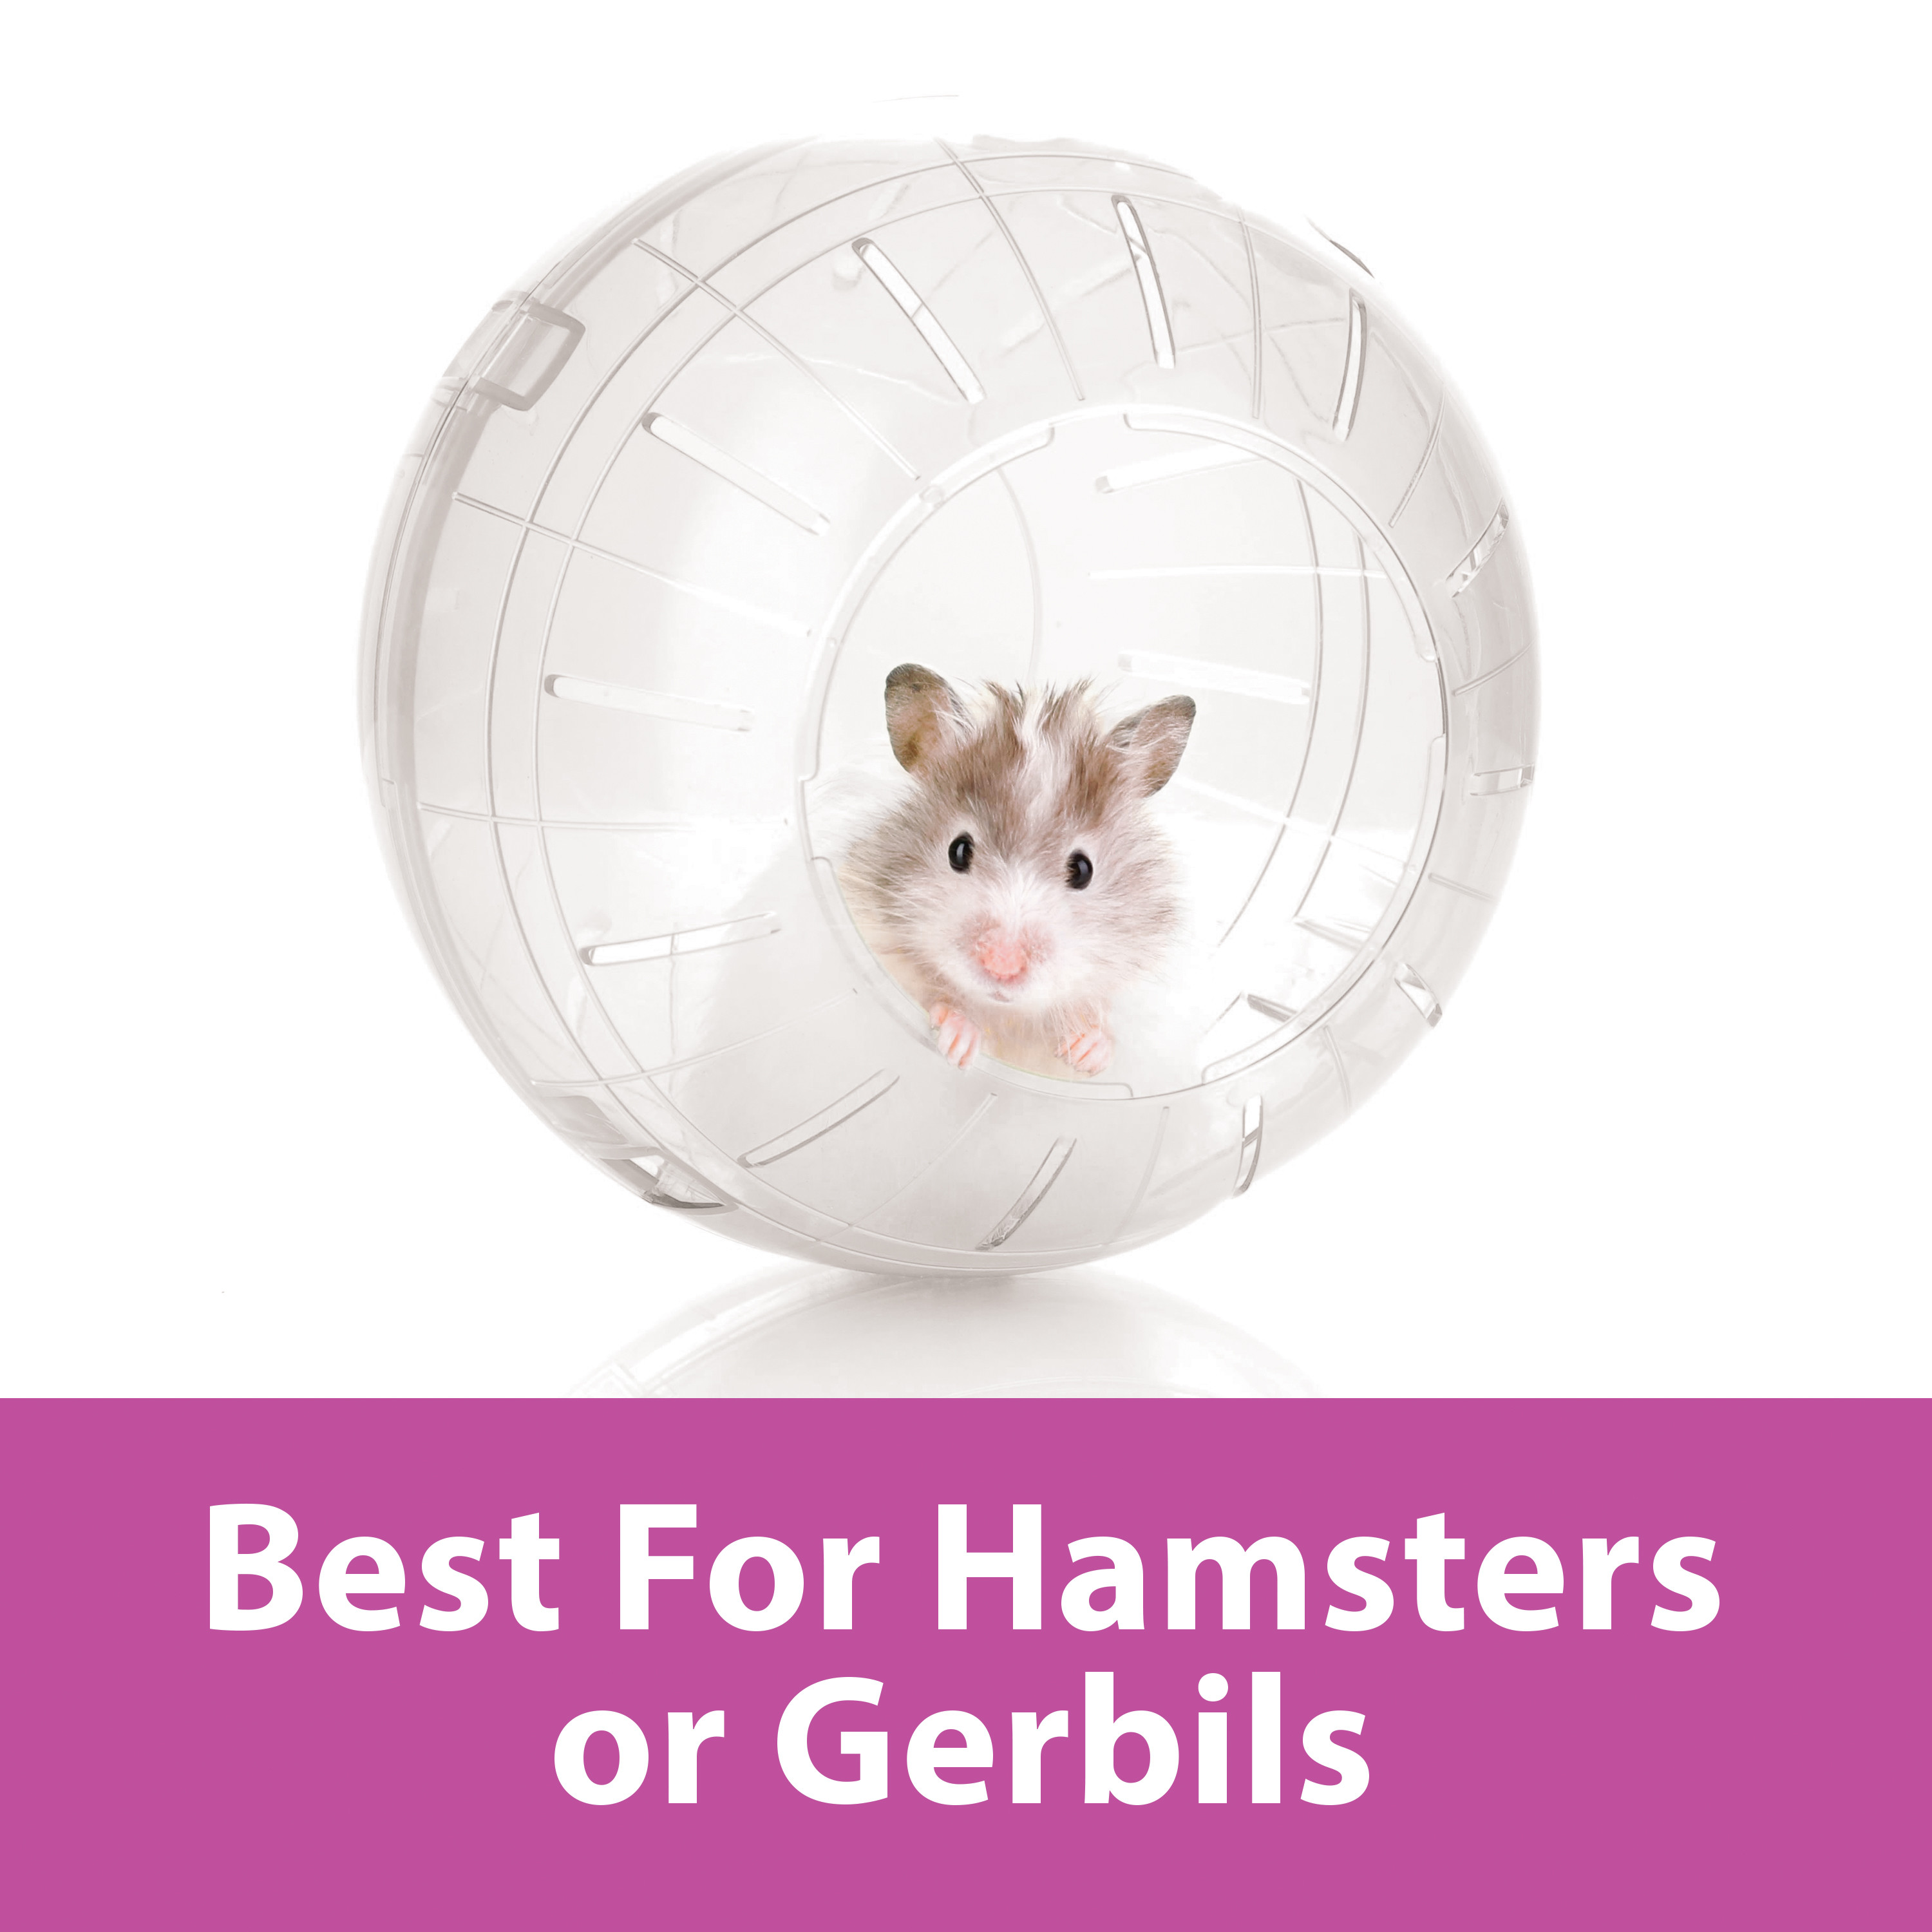 Kaytee Run-About Ball for Hamsters, Gerbils and Other Small Animals, Clear 7 Inches - image 5 of 11